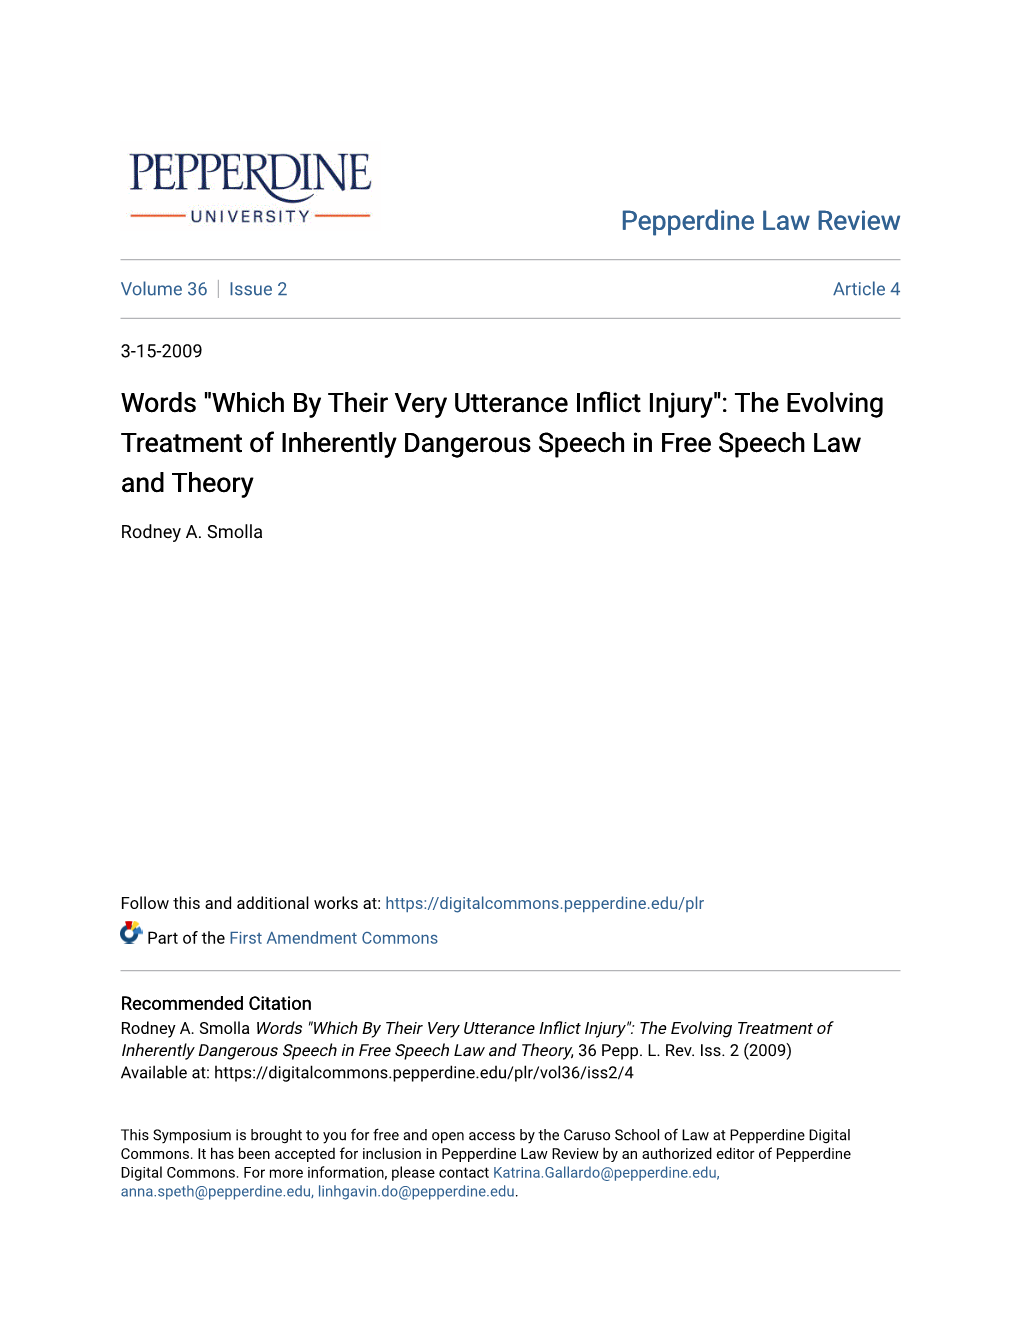 Words "Which by Their Very Utterance Inflict Injury": the Evolving Treatment of Inherently Dangerous Speech in Free Speech Law and Theory